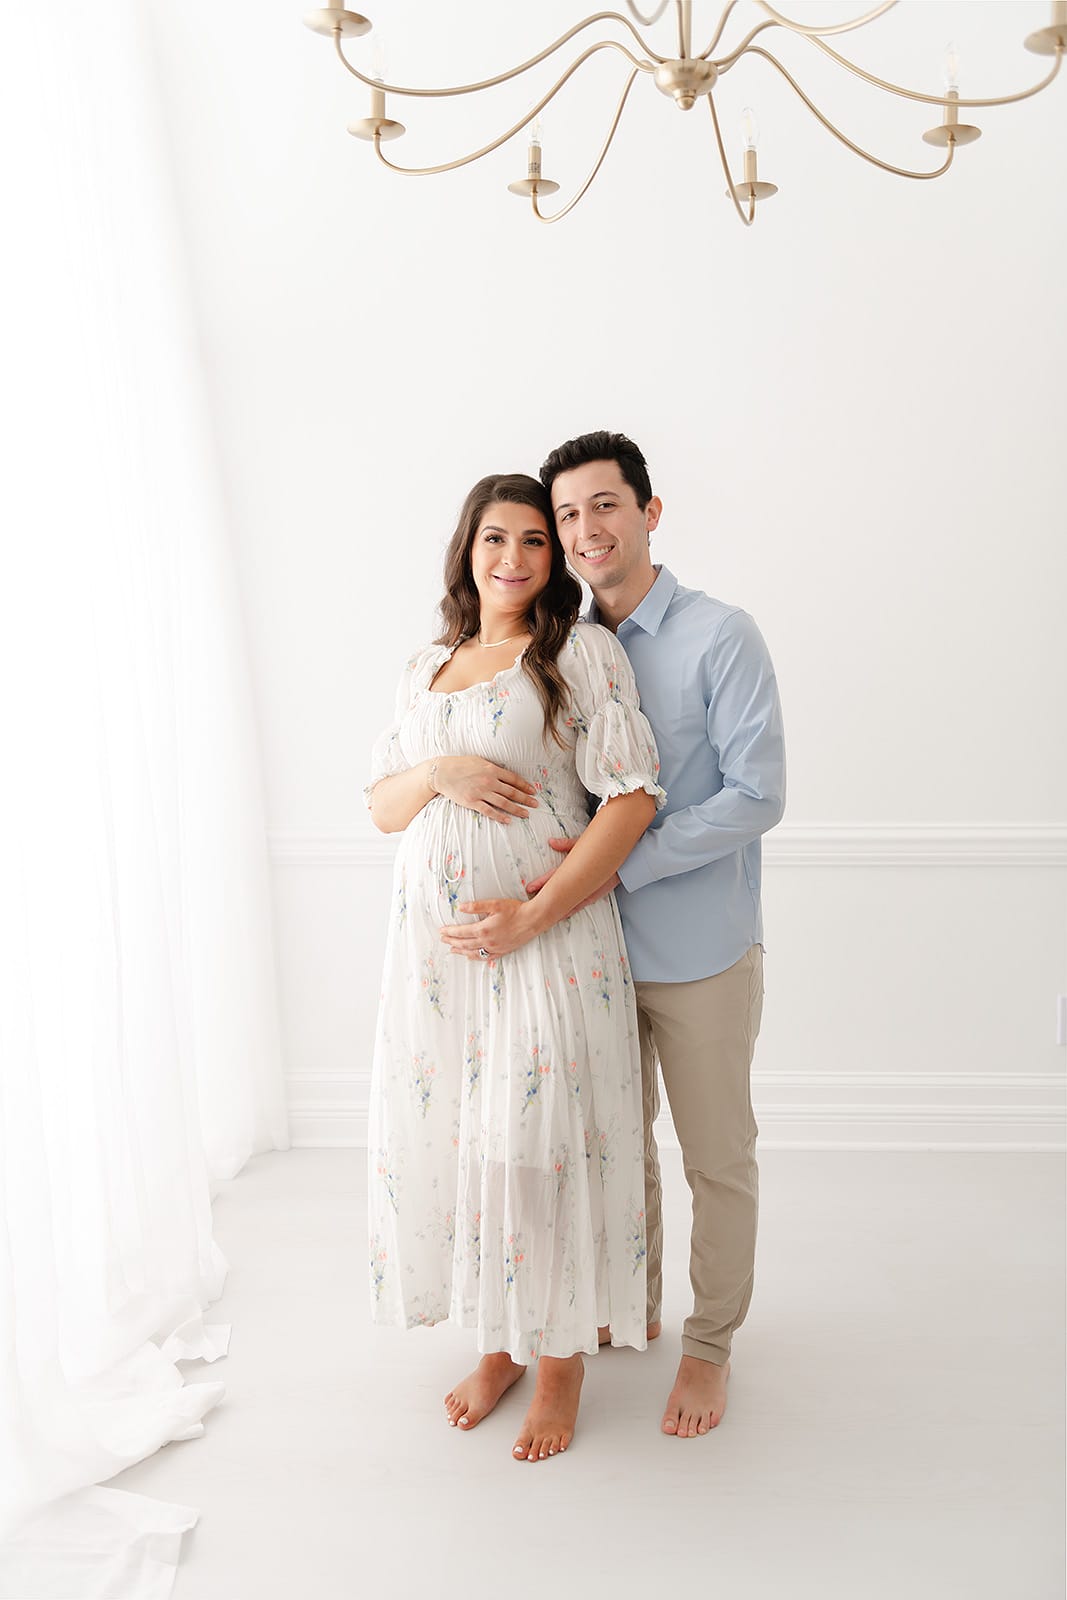 A Pensacola maternity photographer captures an expectant couple striking a pose in front of a chandelier in a pristine white room.